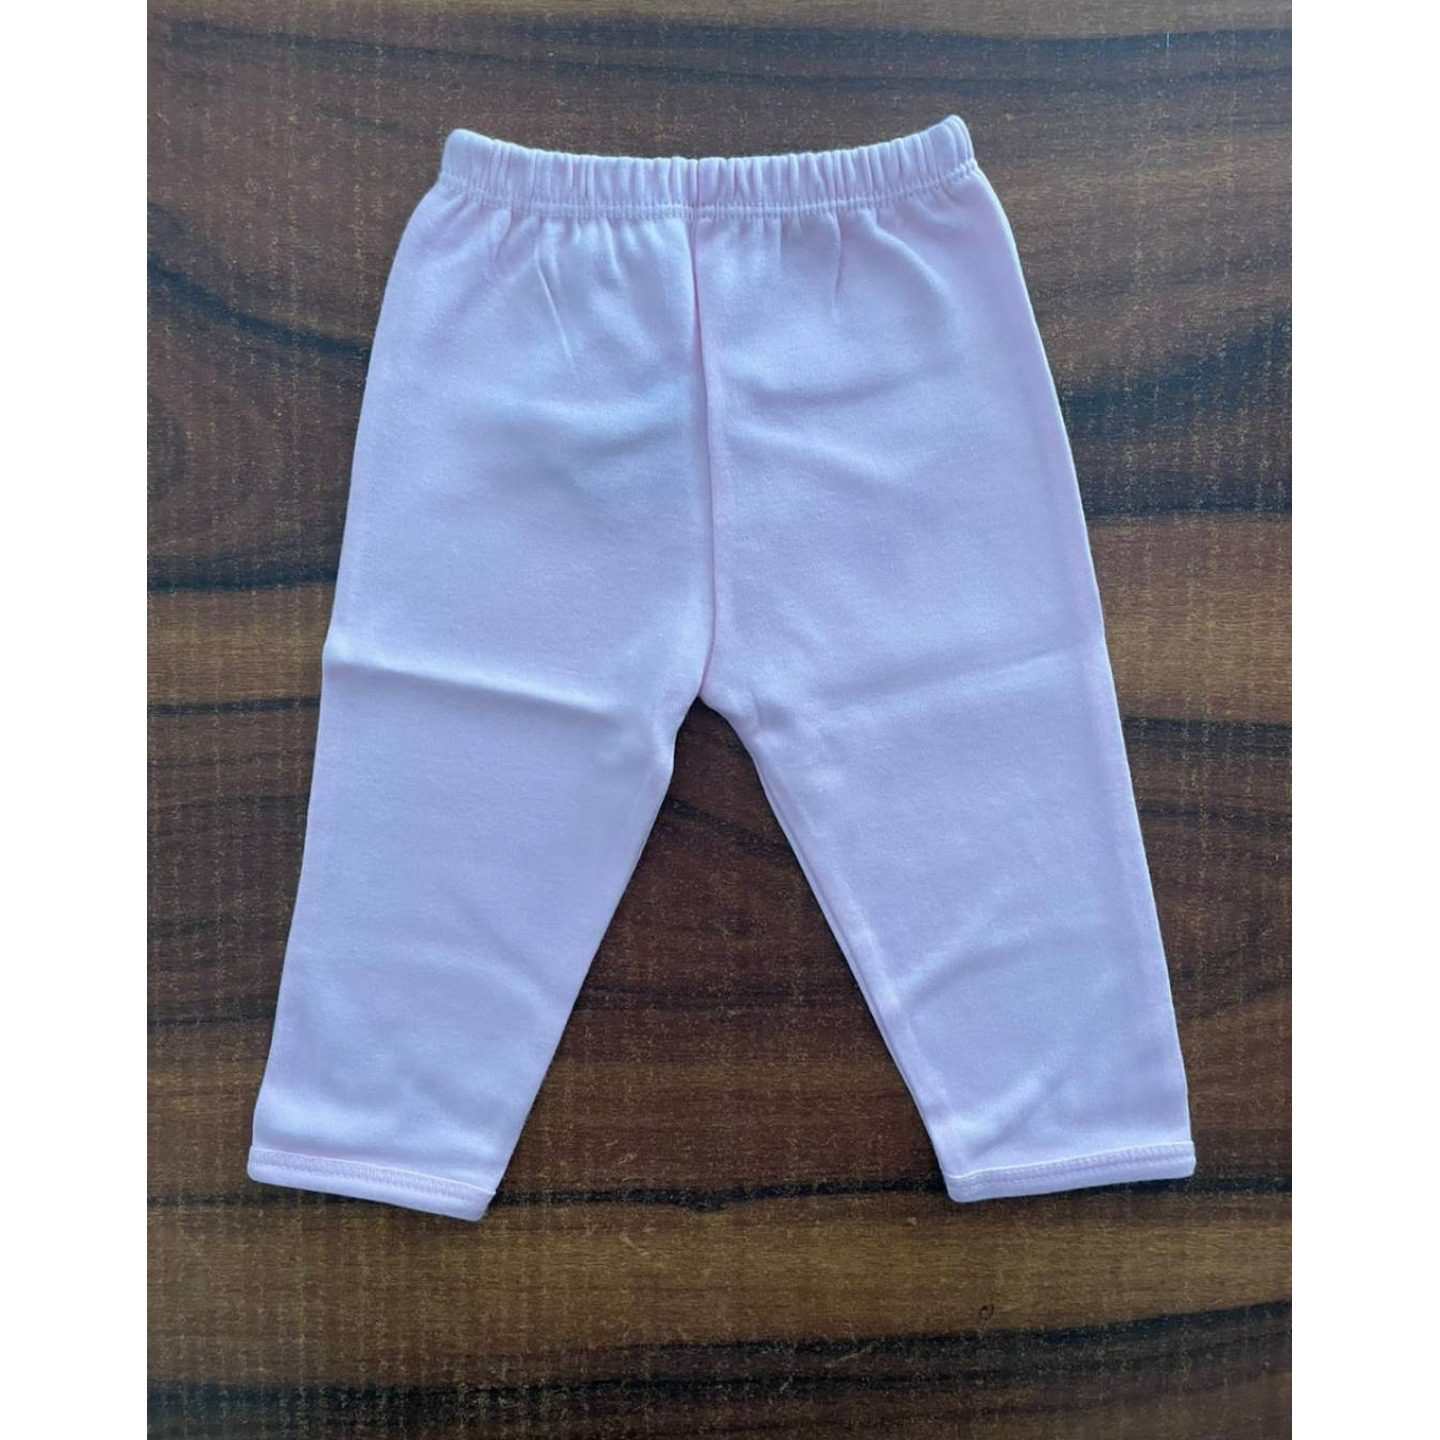 Cradle Togs Leggings Rs 165 Only 3 to 6 Months Size